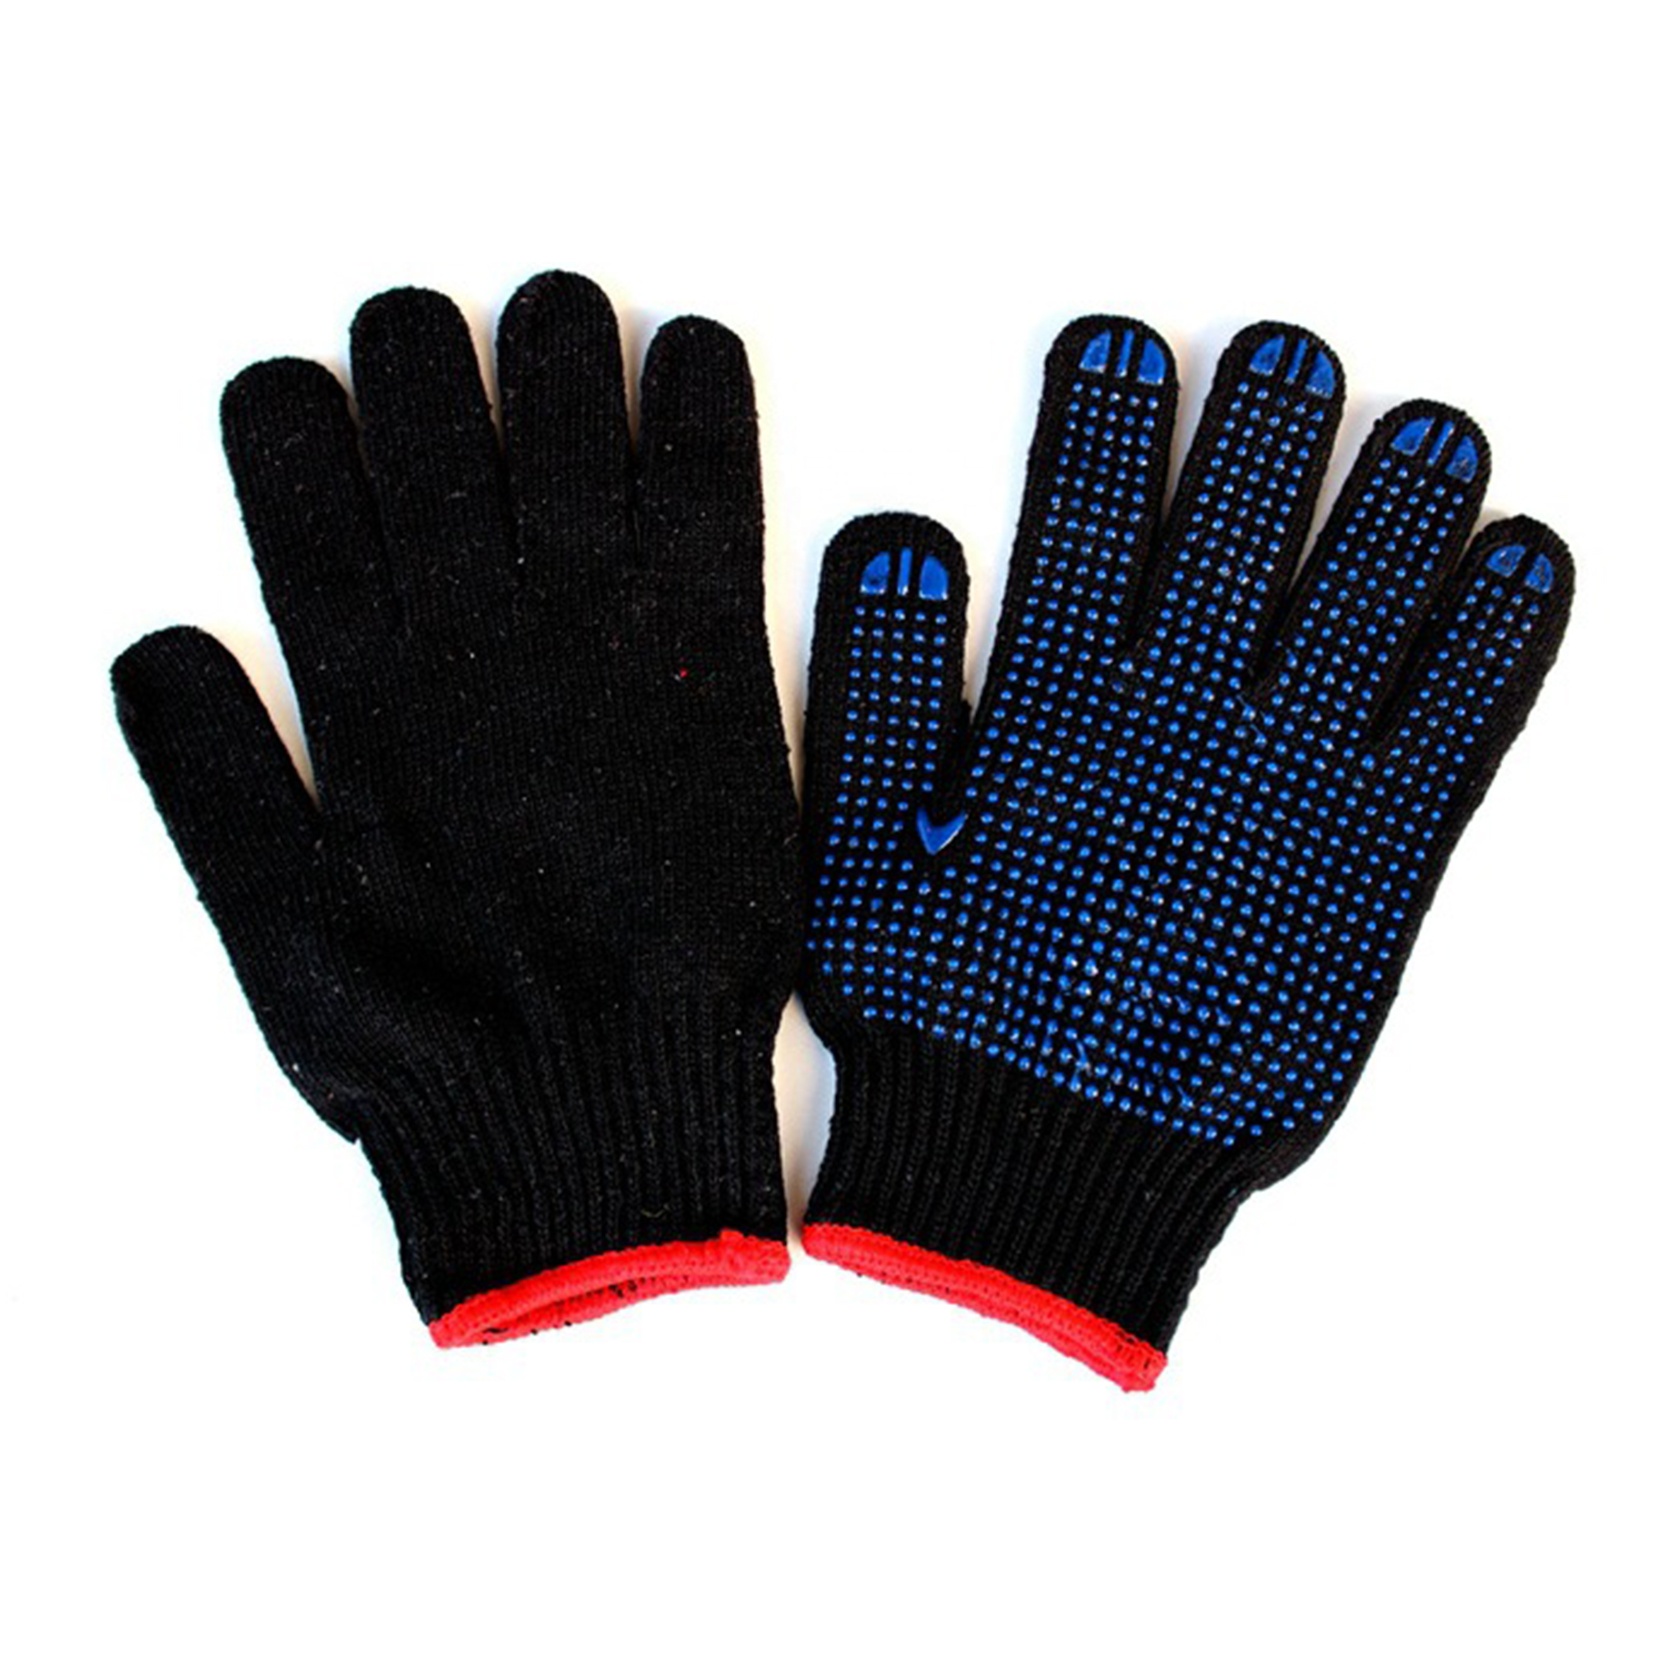 Pvc Dotted Knitted Labor Industrial Touch Nylon Gloves (3)